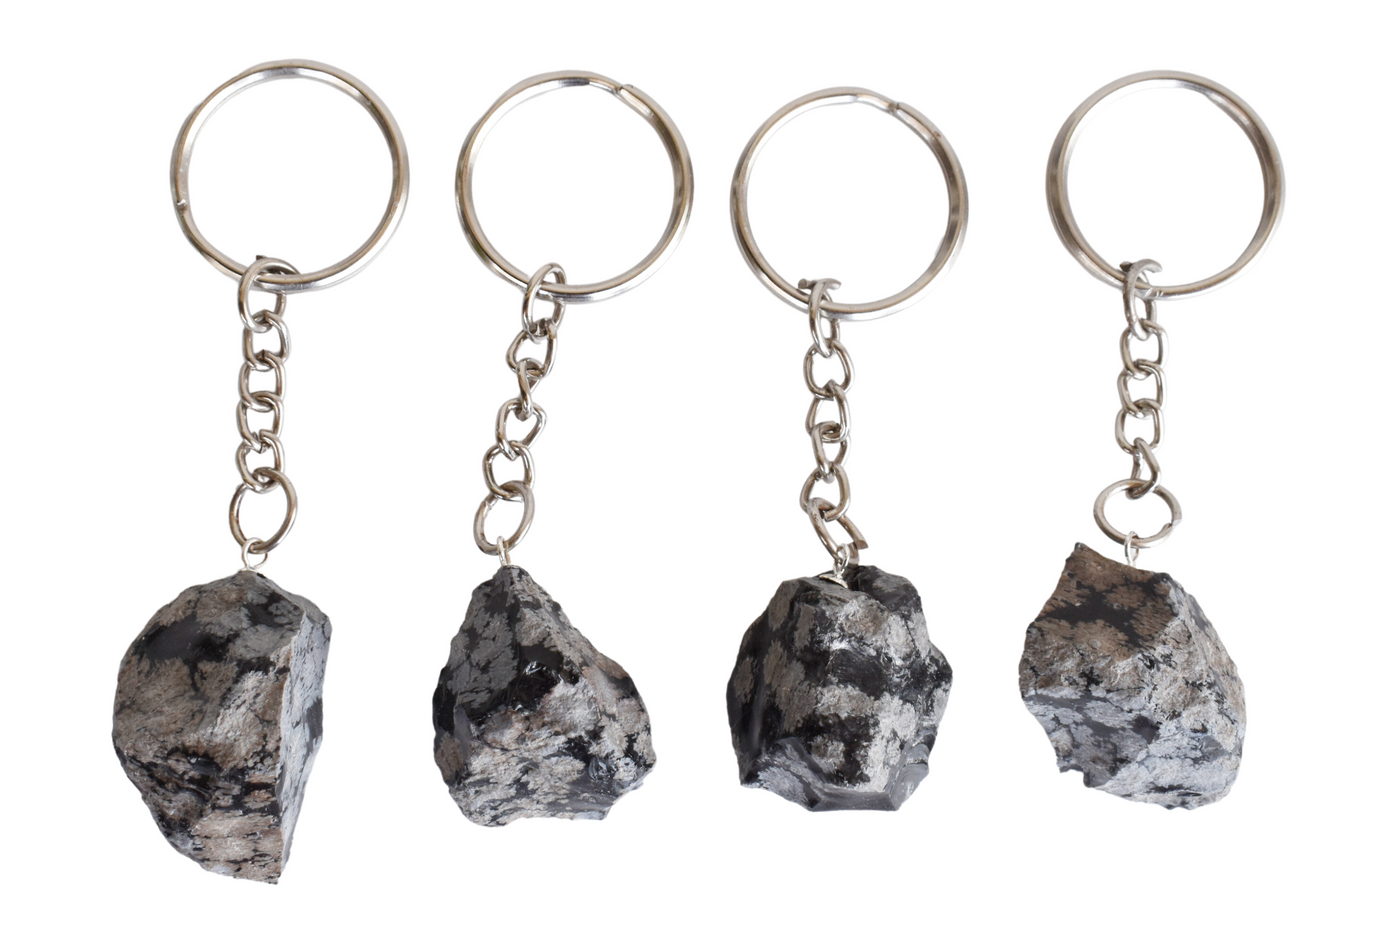 Snowflake Obsidian Key Chain, Gemstone Keychain Crystal Key Ring (Expanded Awareness and Intuition)